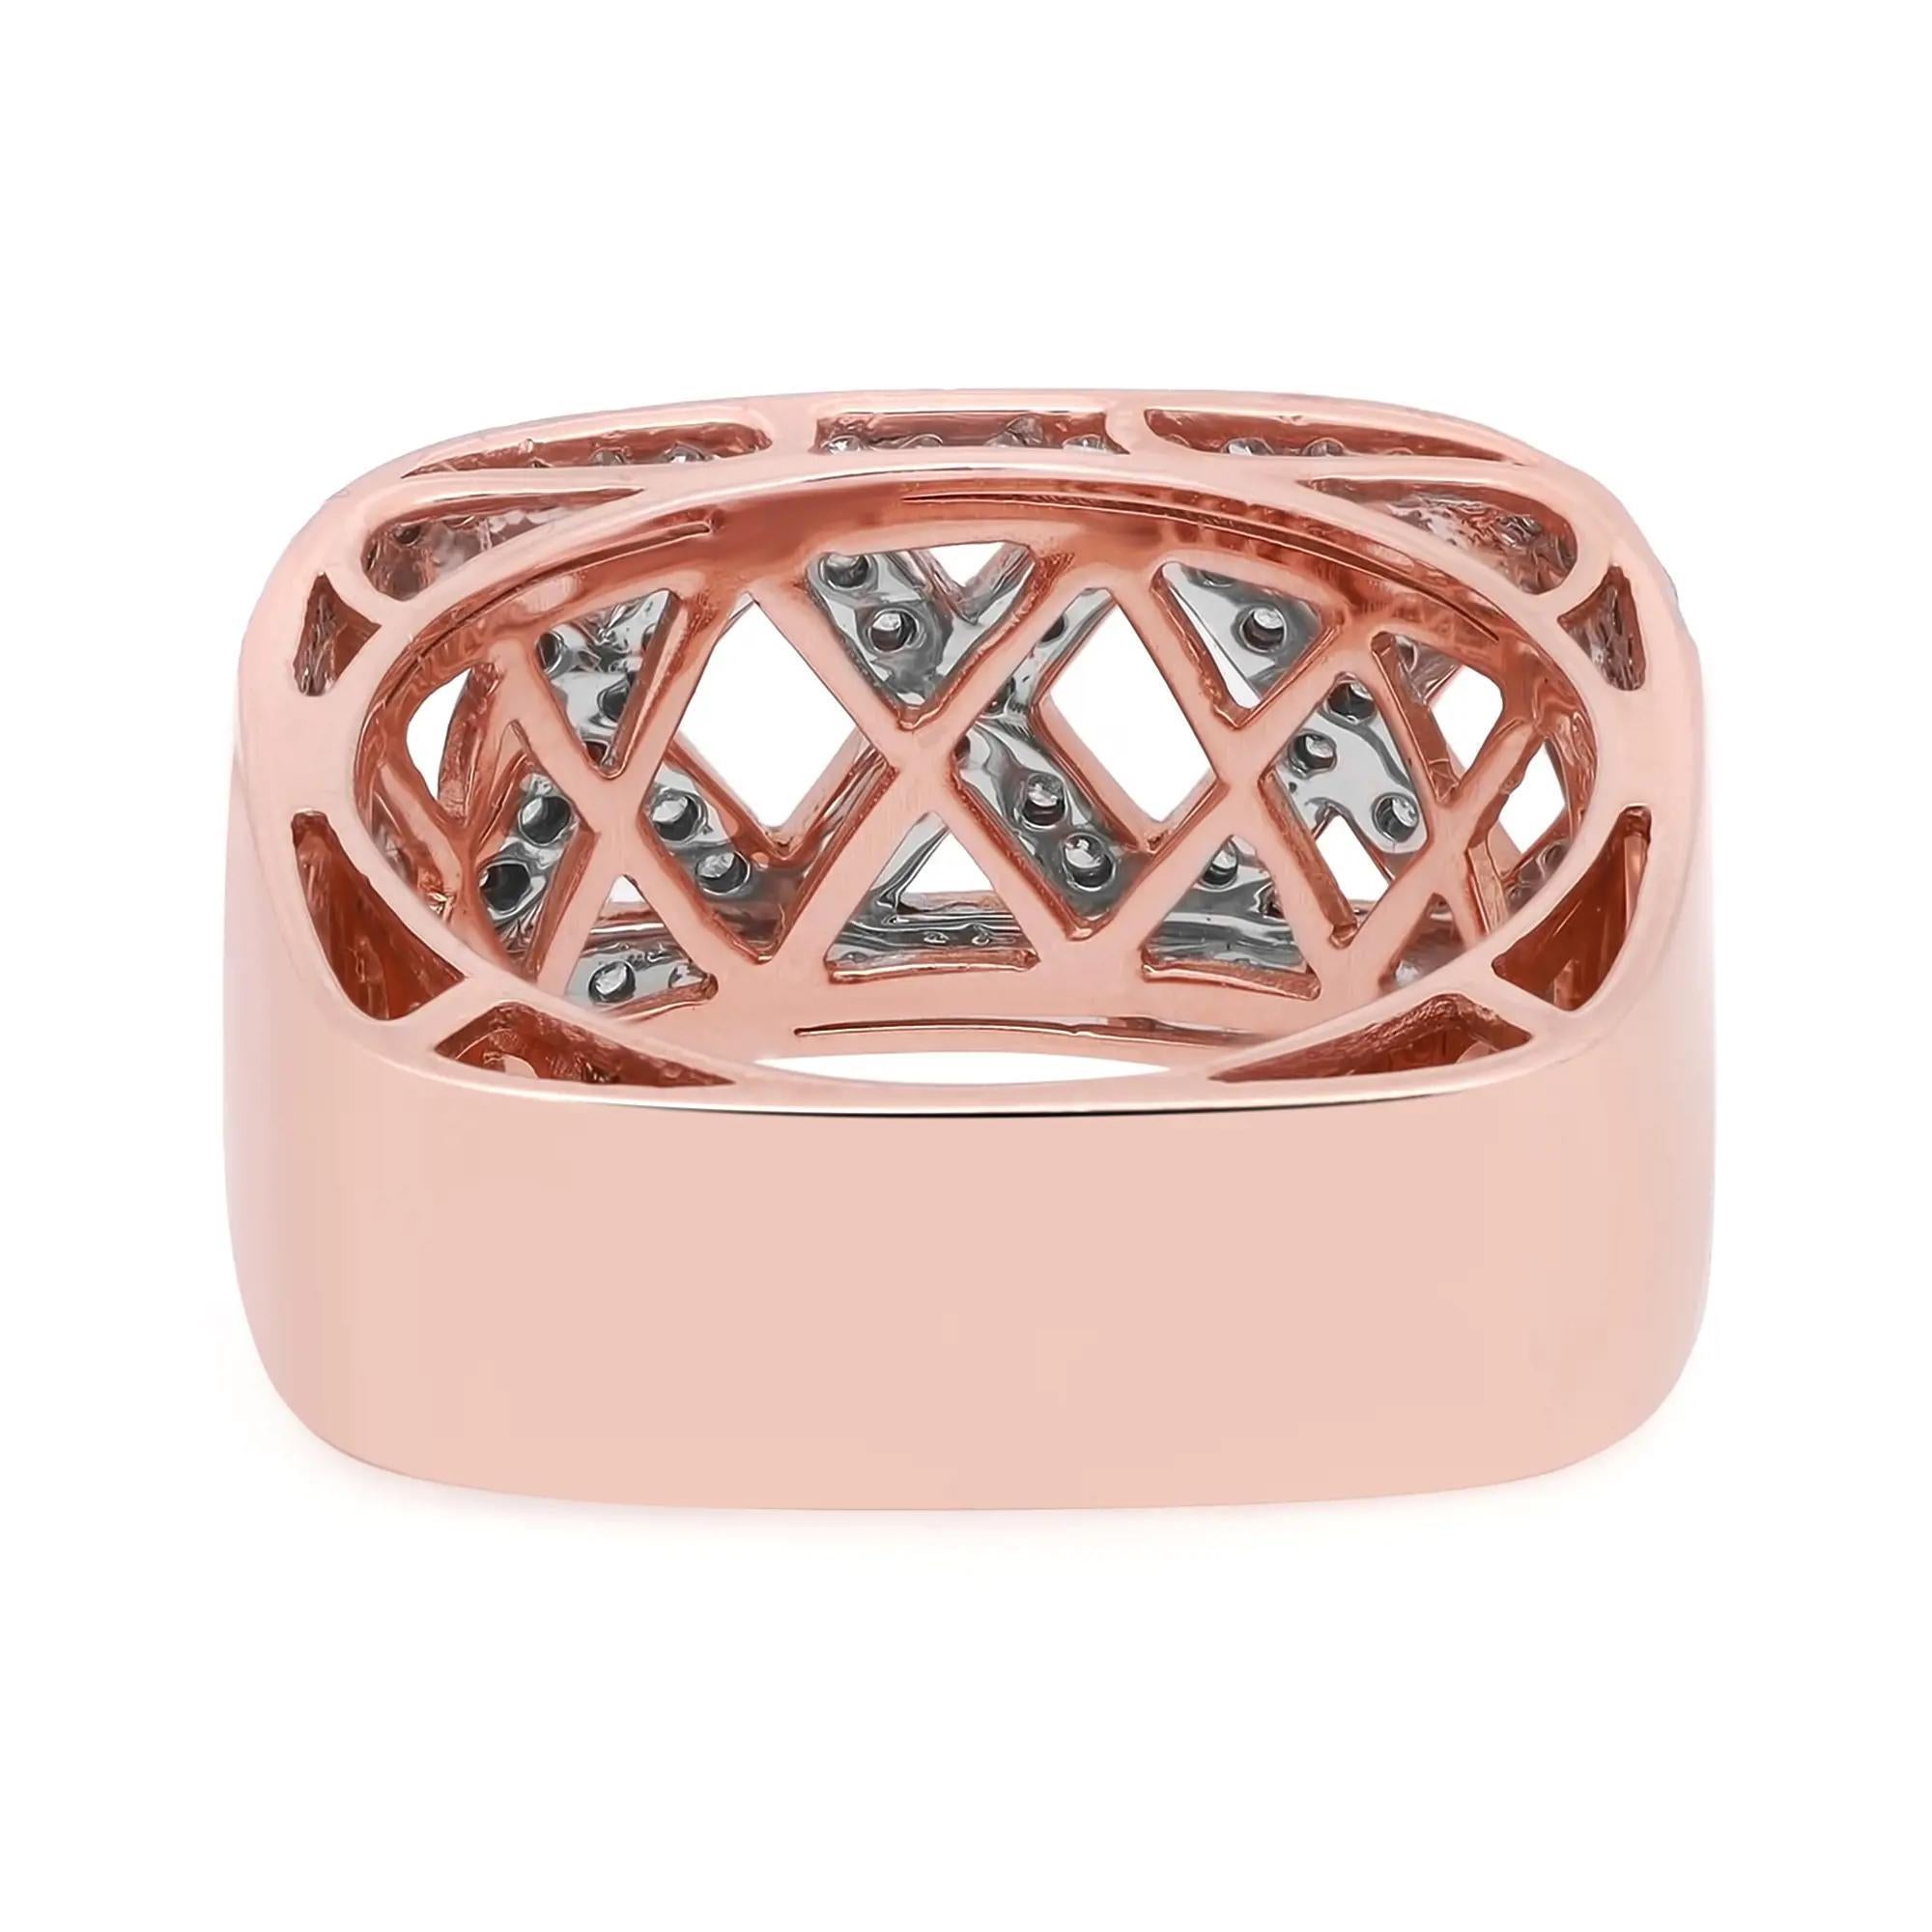 This wide band openwork crisscross square ring is crafted in high polished 14K rose gold. Set with round cut diamonds, totaling 0.54 carat. The diamond color is H-I with SI-I clarity. Ring size 7.5. Width of the ring 10.3 mm. Total weight: 8.20